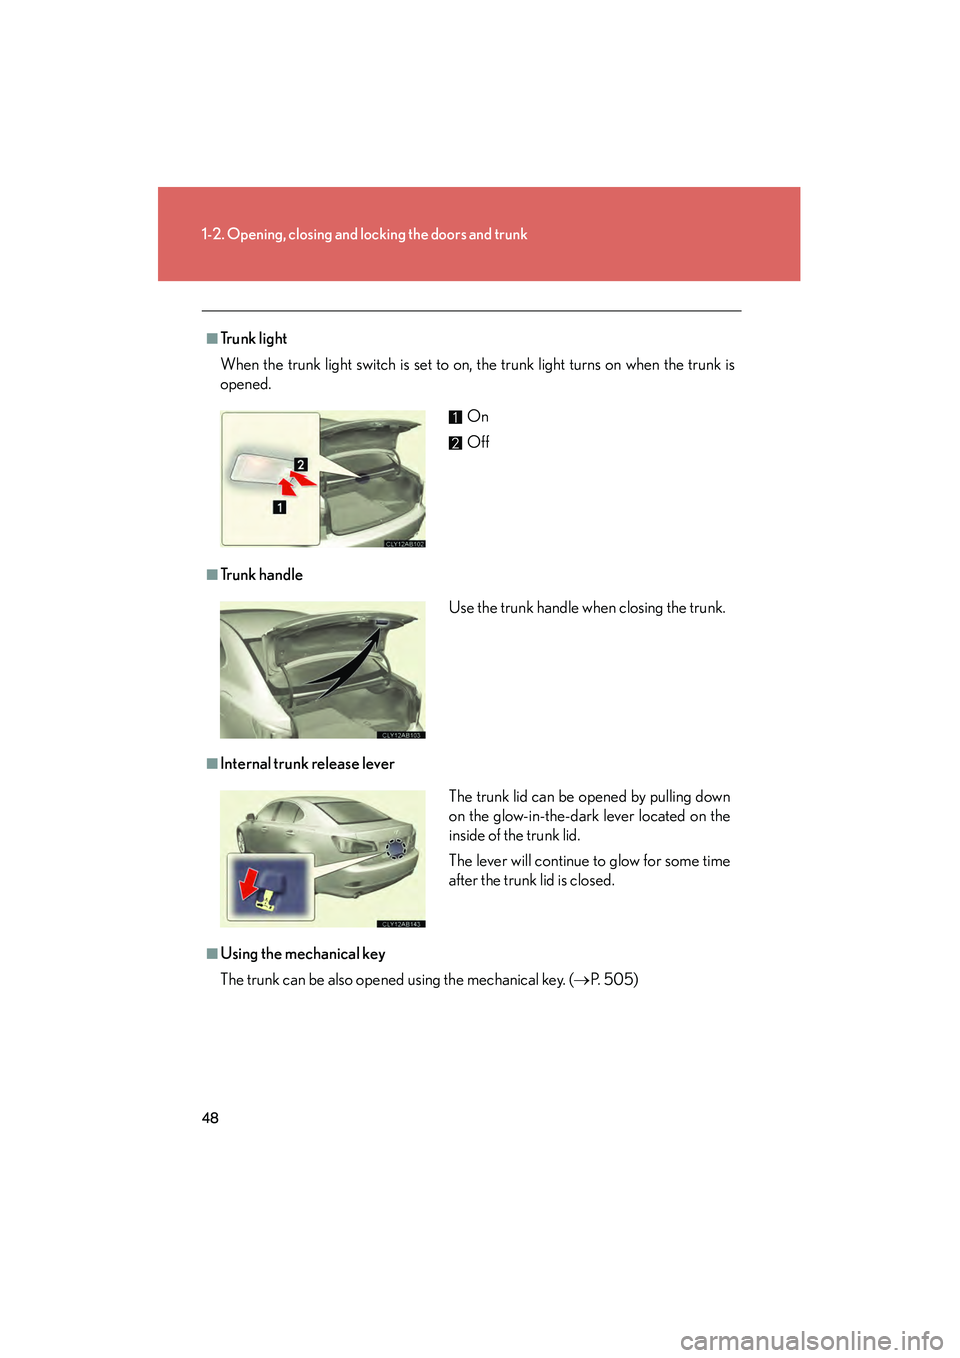 Lexus IS250 2010 Service Manual 48
1-2. Opening, closing and locking the doors and trunk
IS350/250_U
■Trunk light
When the trunk light switch is set to on, the trunk light turns on when the trunk is
opened. 
■Tr u n k  h a n d l